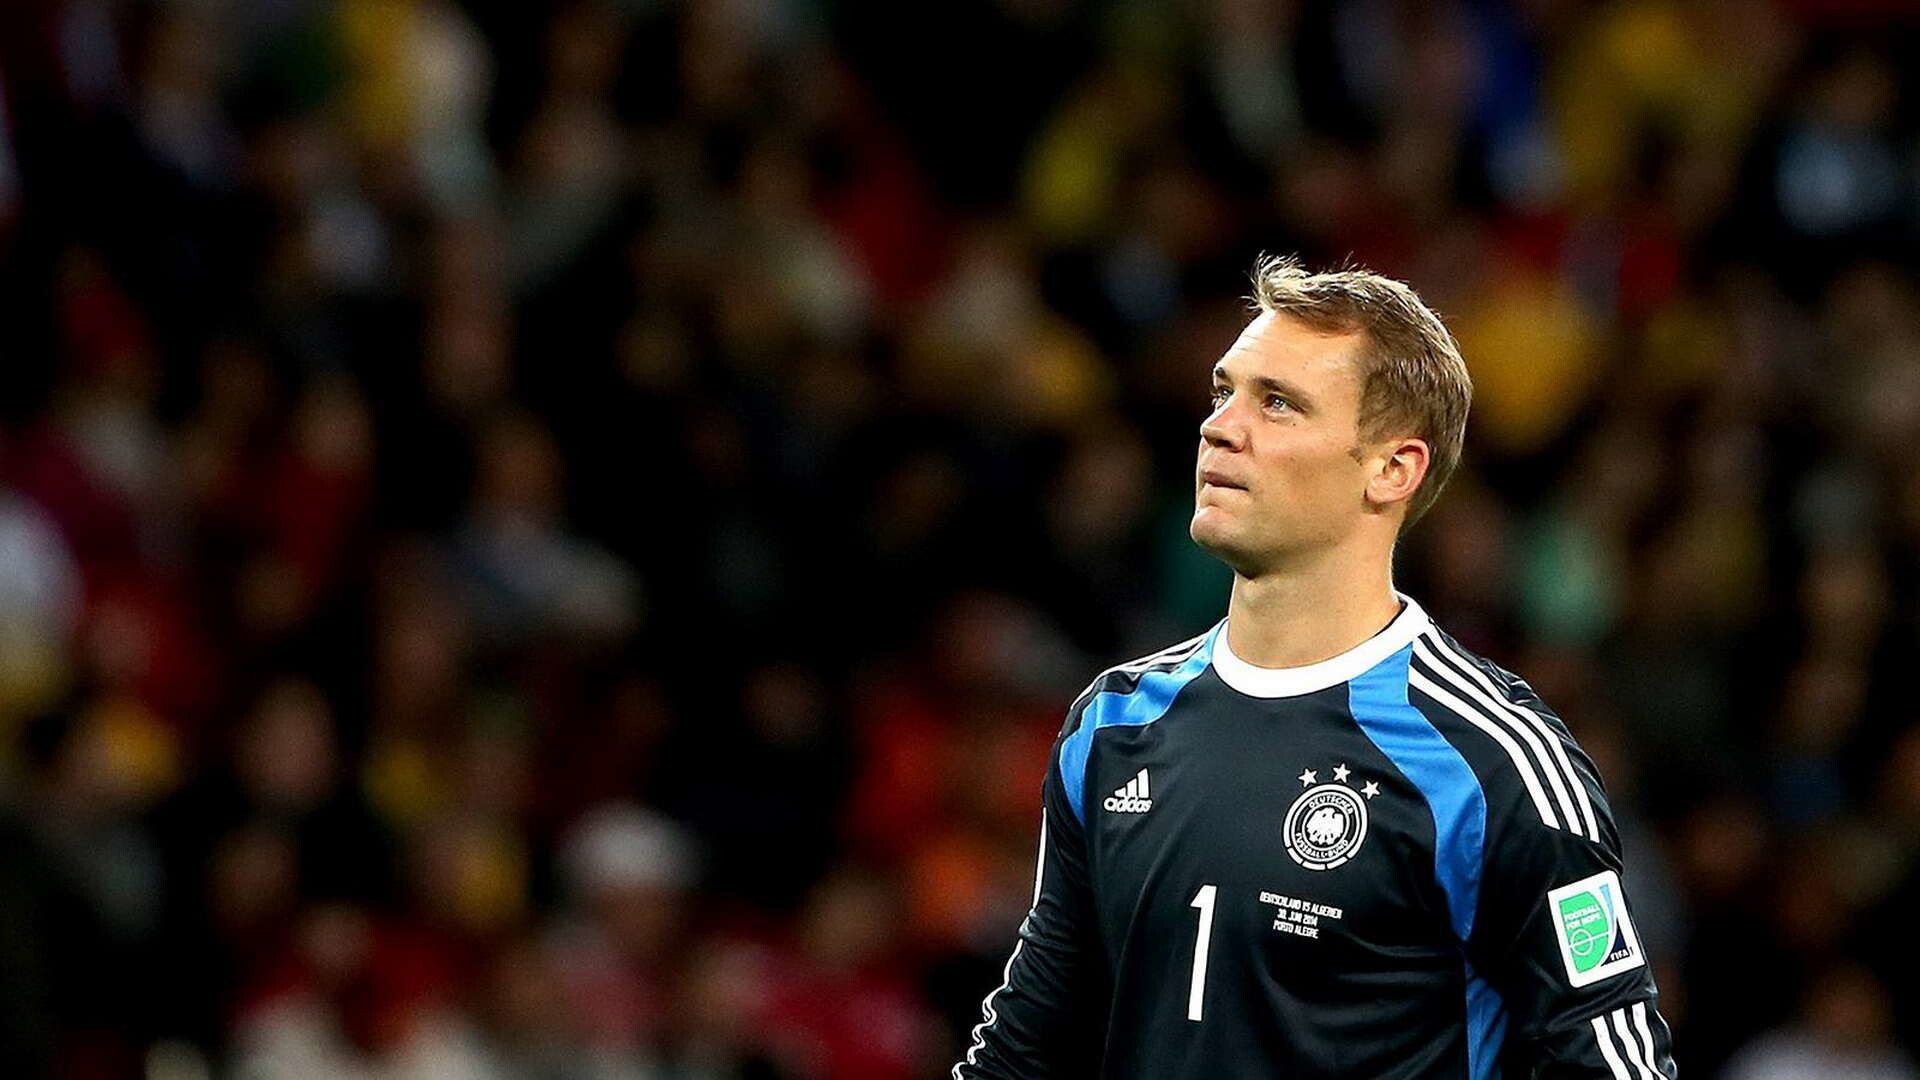 Germany Soccer Team: Manuel Neuer, The best goalkeeper of the decade from 2011 to 2020 by IFFHS, Bayern Munich captain. 1920x1080 Full HD Background.